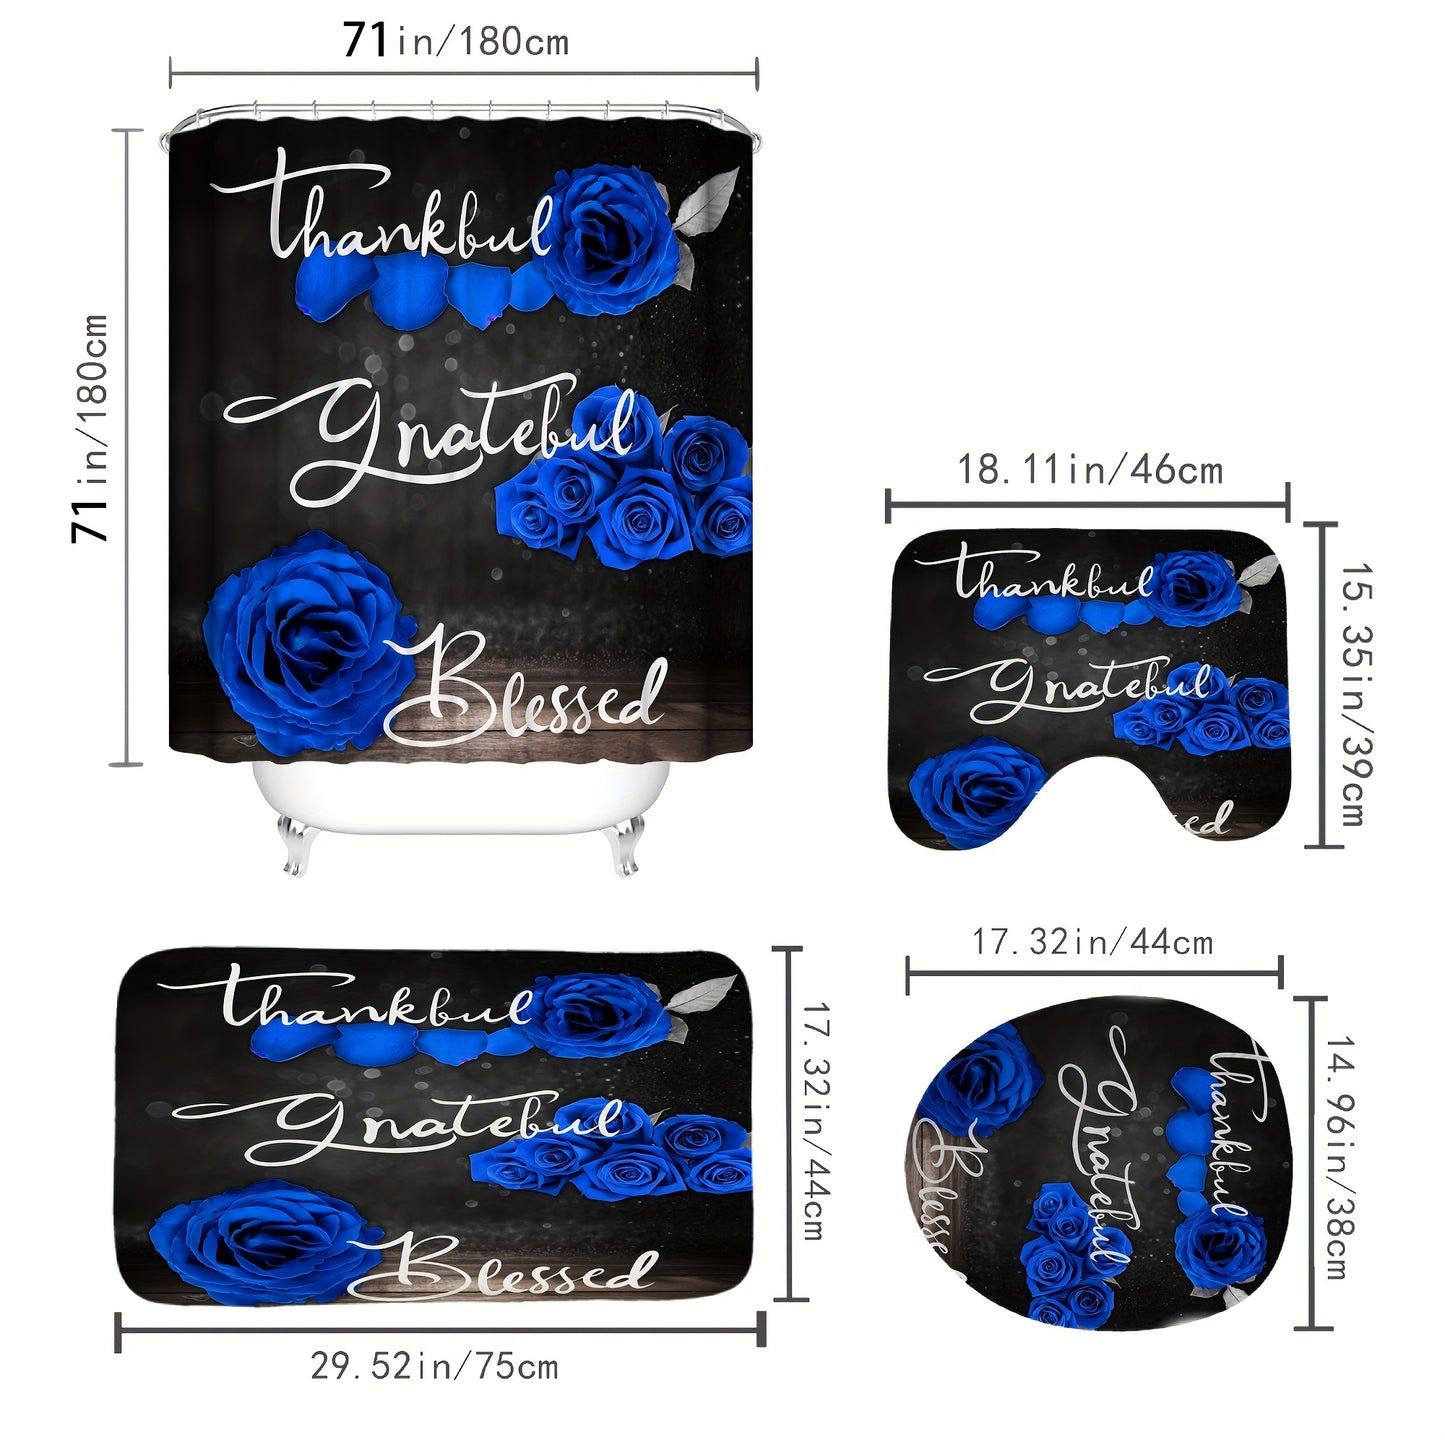 Thankful Grateful Blessed 4-Piece Blue Rose Christian Shower Curtain Set - Includes Non-Slip Toilet Seat Cover, Bath Mat & 12 Plastic Hooks claimedbygoddesigns